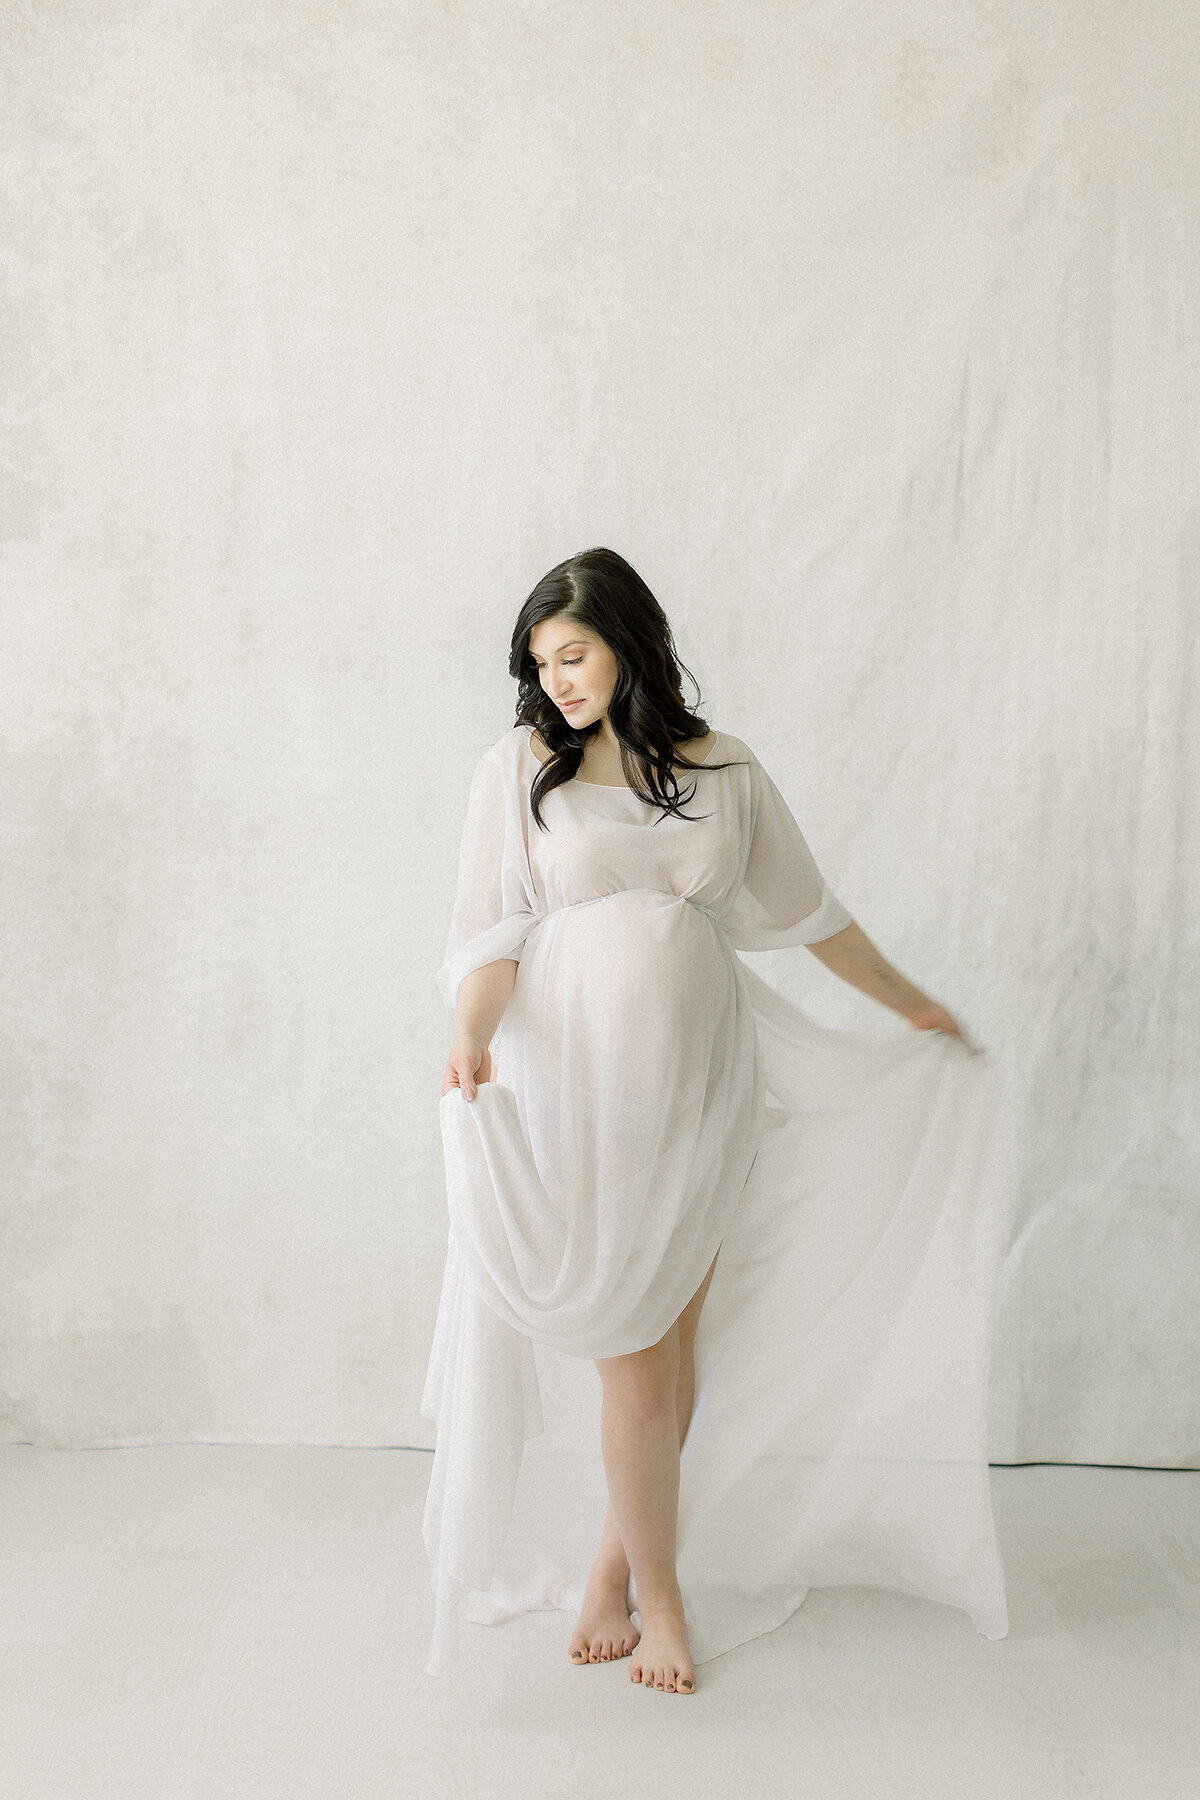 A light filled in studio maternity session taken in a Dallas/Fort Worth area photography studio of an expecting mother while she is playfully holding her chiffon maternity dress.